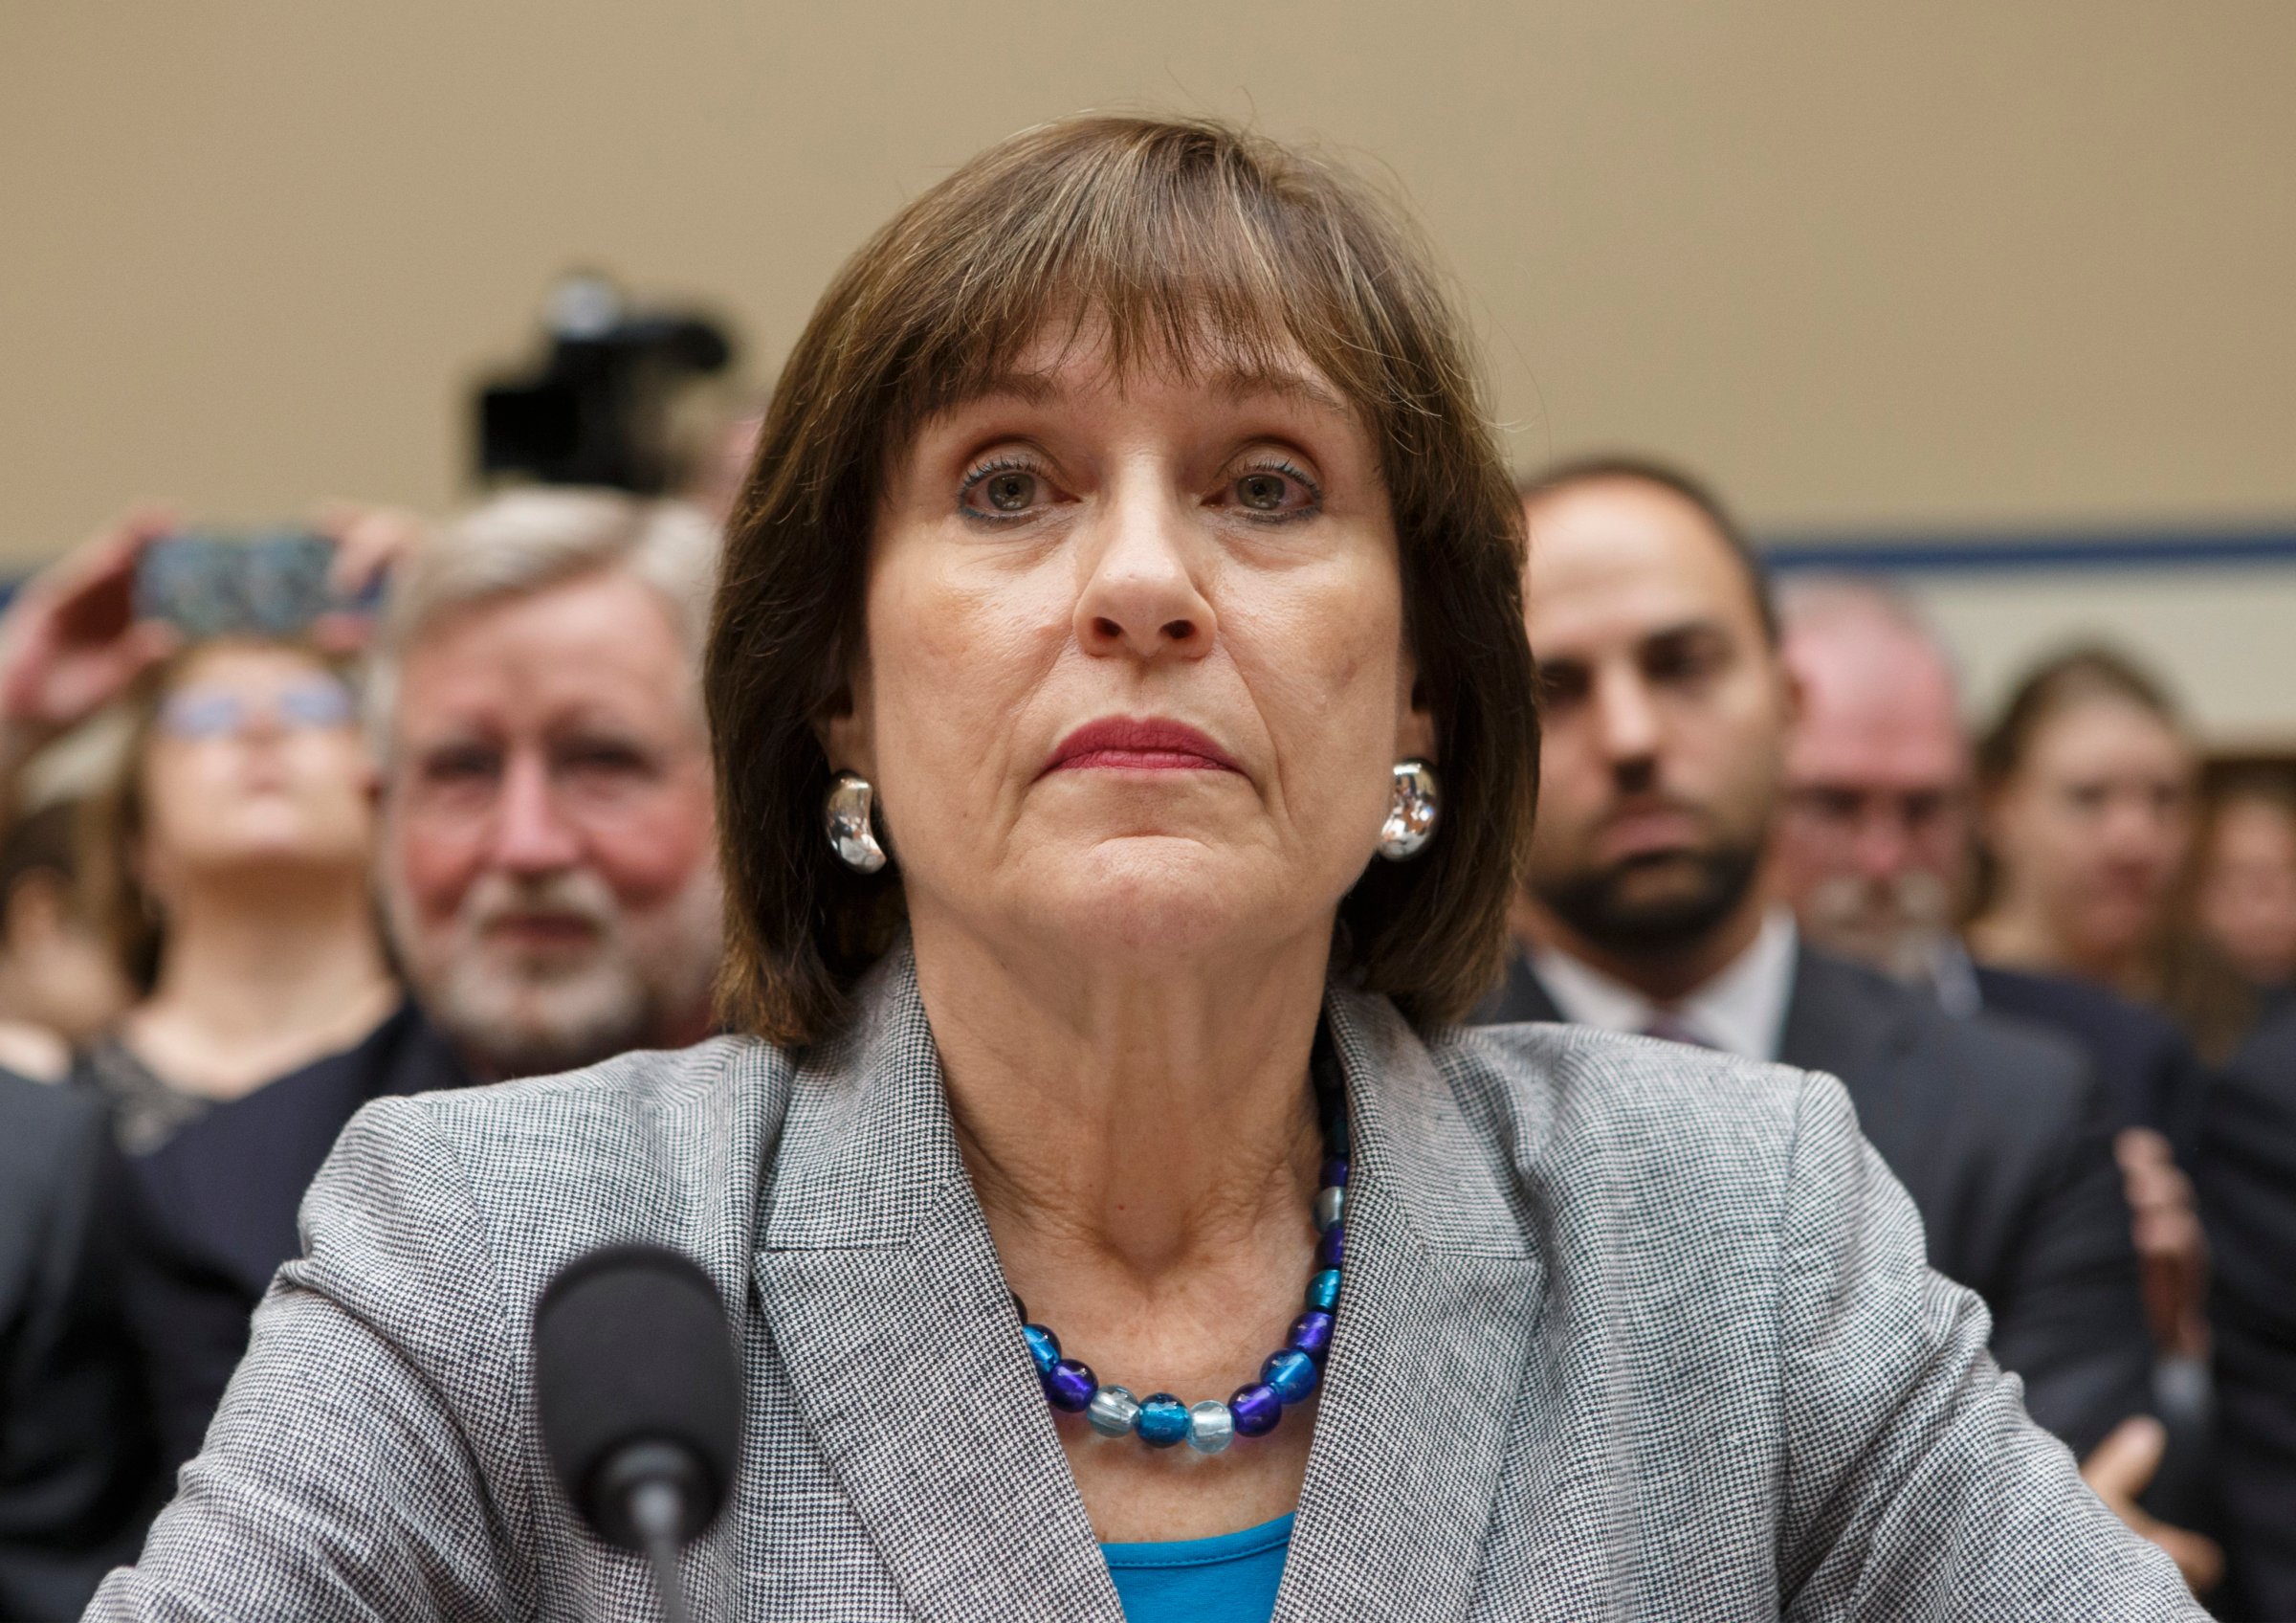 Internal Revenue Service official Lois Lerner refuses to answer questions as the House Oversight Committee holds a hearing to investigate the extra scrutiny the IRS gave Tea Party and other conservative groups that applied for tax-exempt status, on Capitol Hill in Washington, D.C., on May 22, 2013.